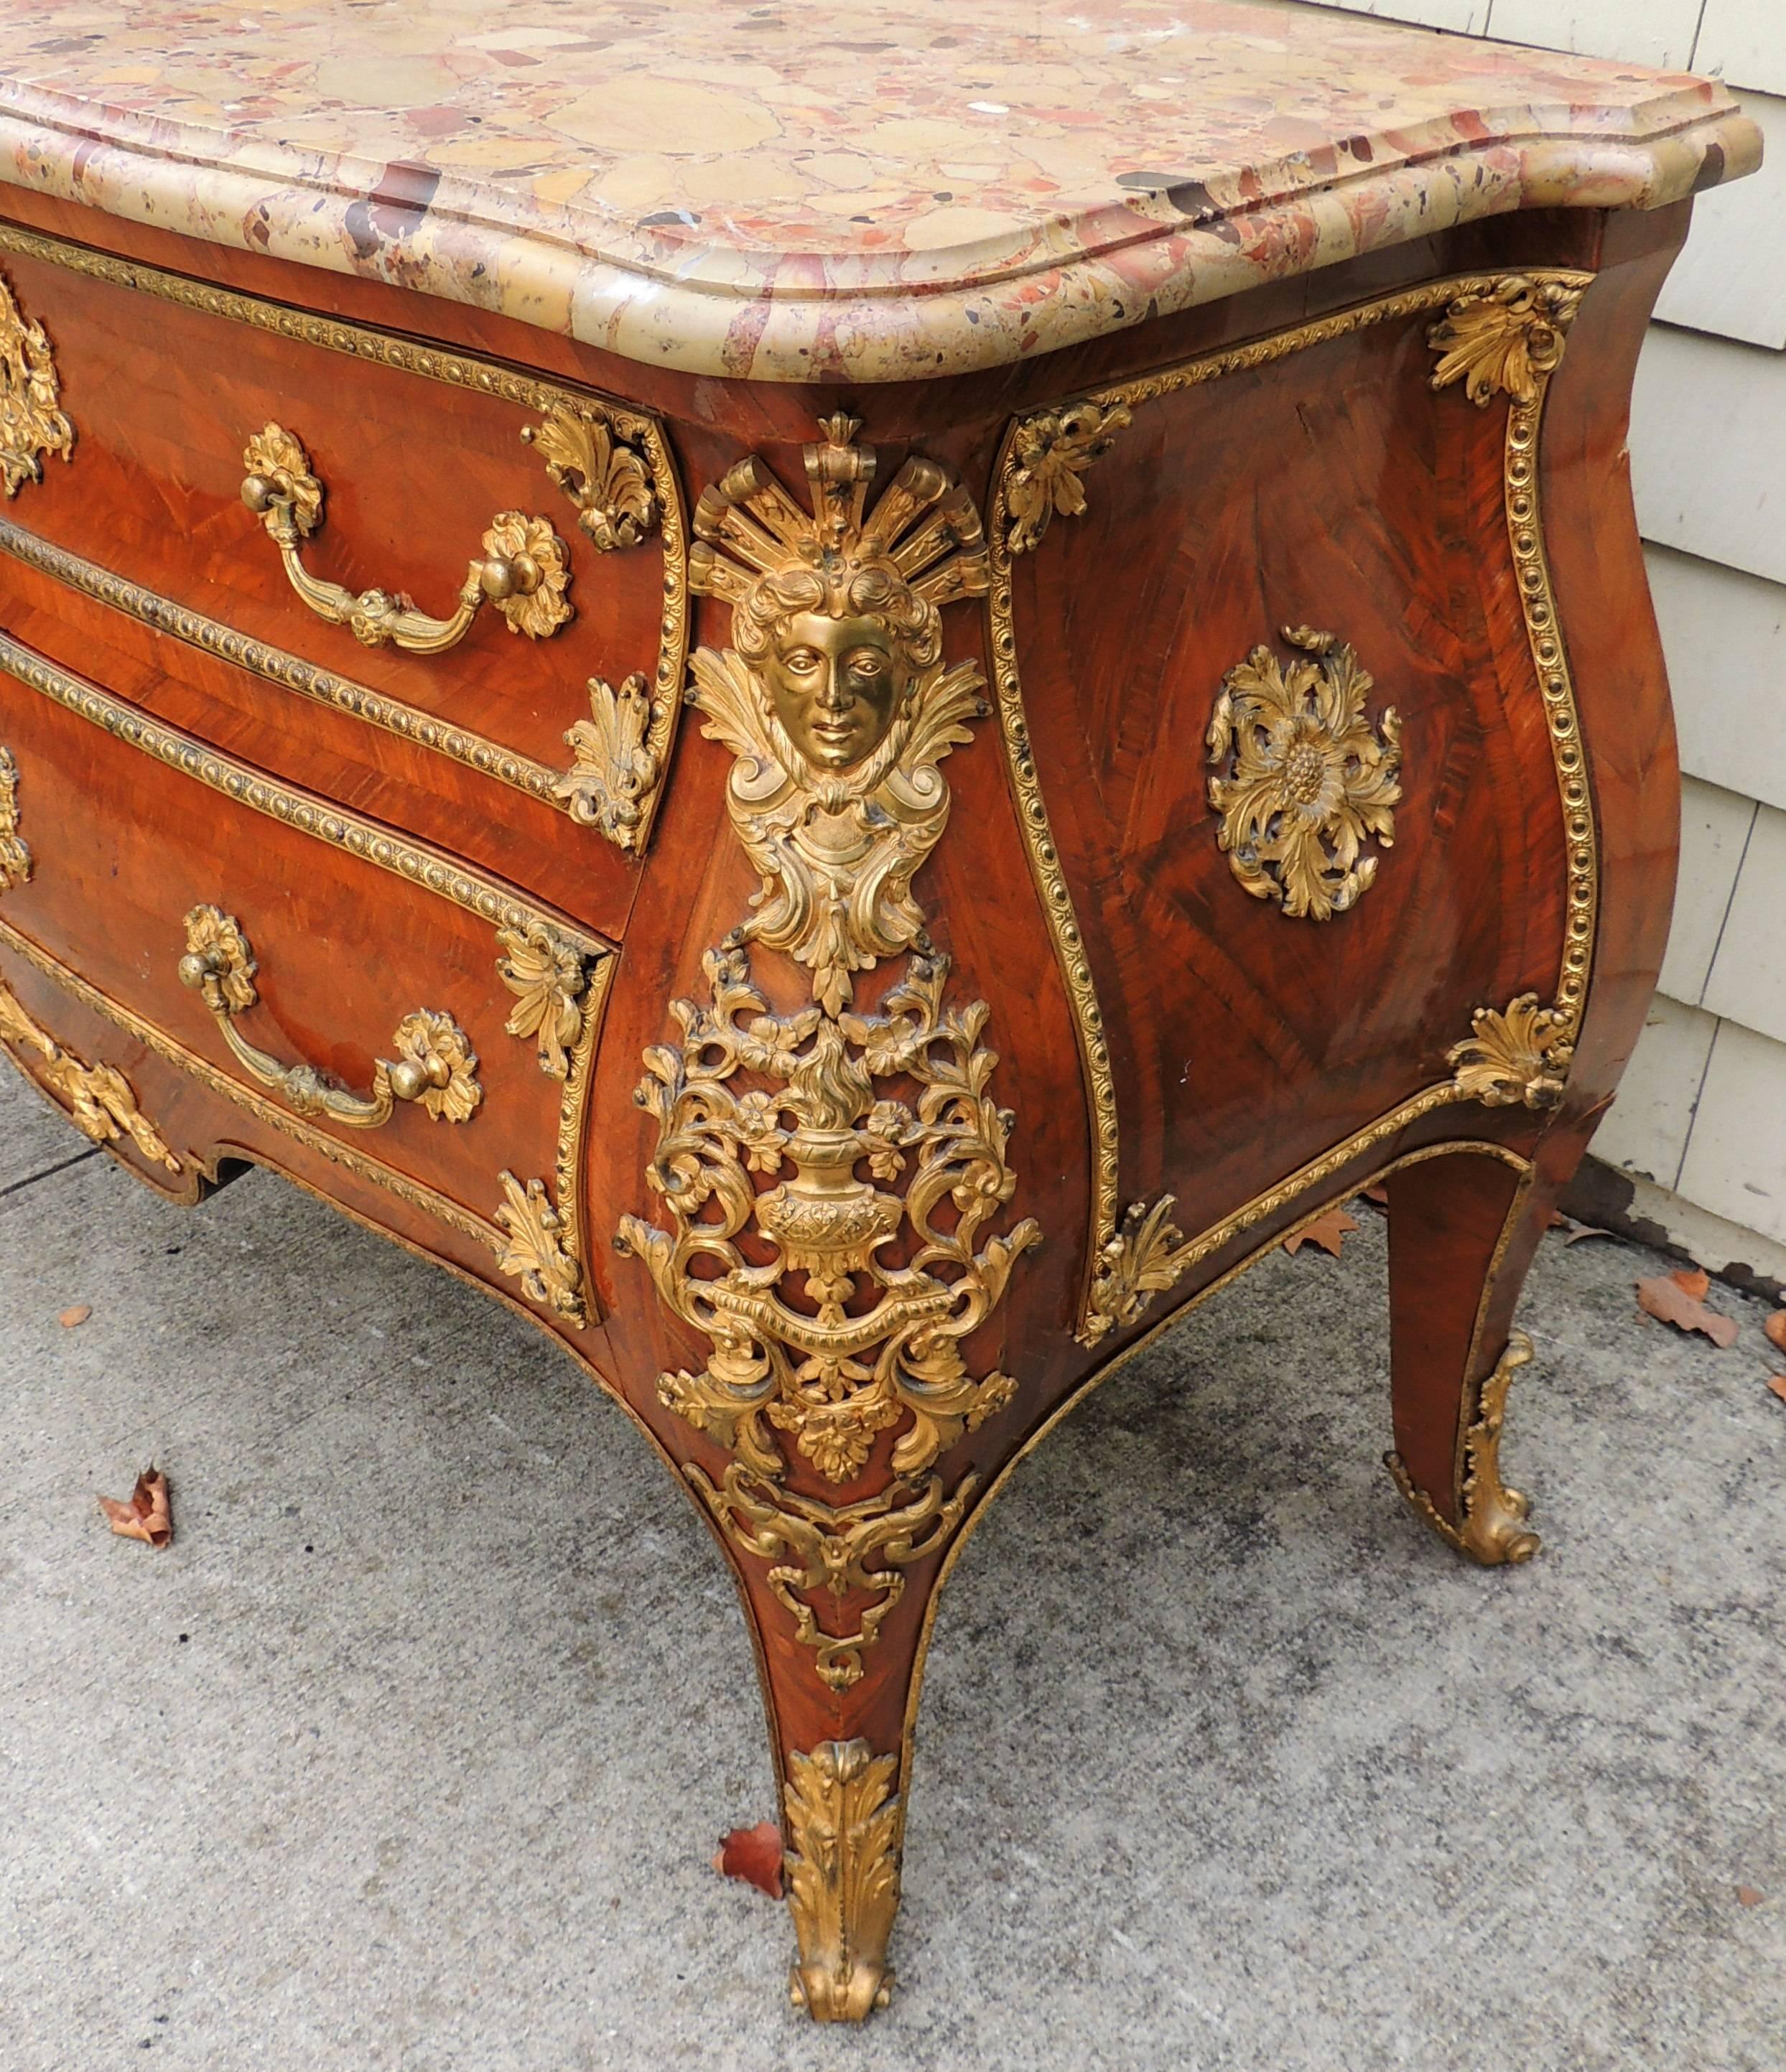 A wonderful late 19th century Louis XV style two-drawer commode or chest with doré bronze ormolu-mounted, tulip and kingwood parquetry and original marble-top.
Measurements: 36.5